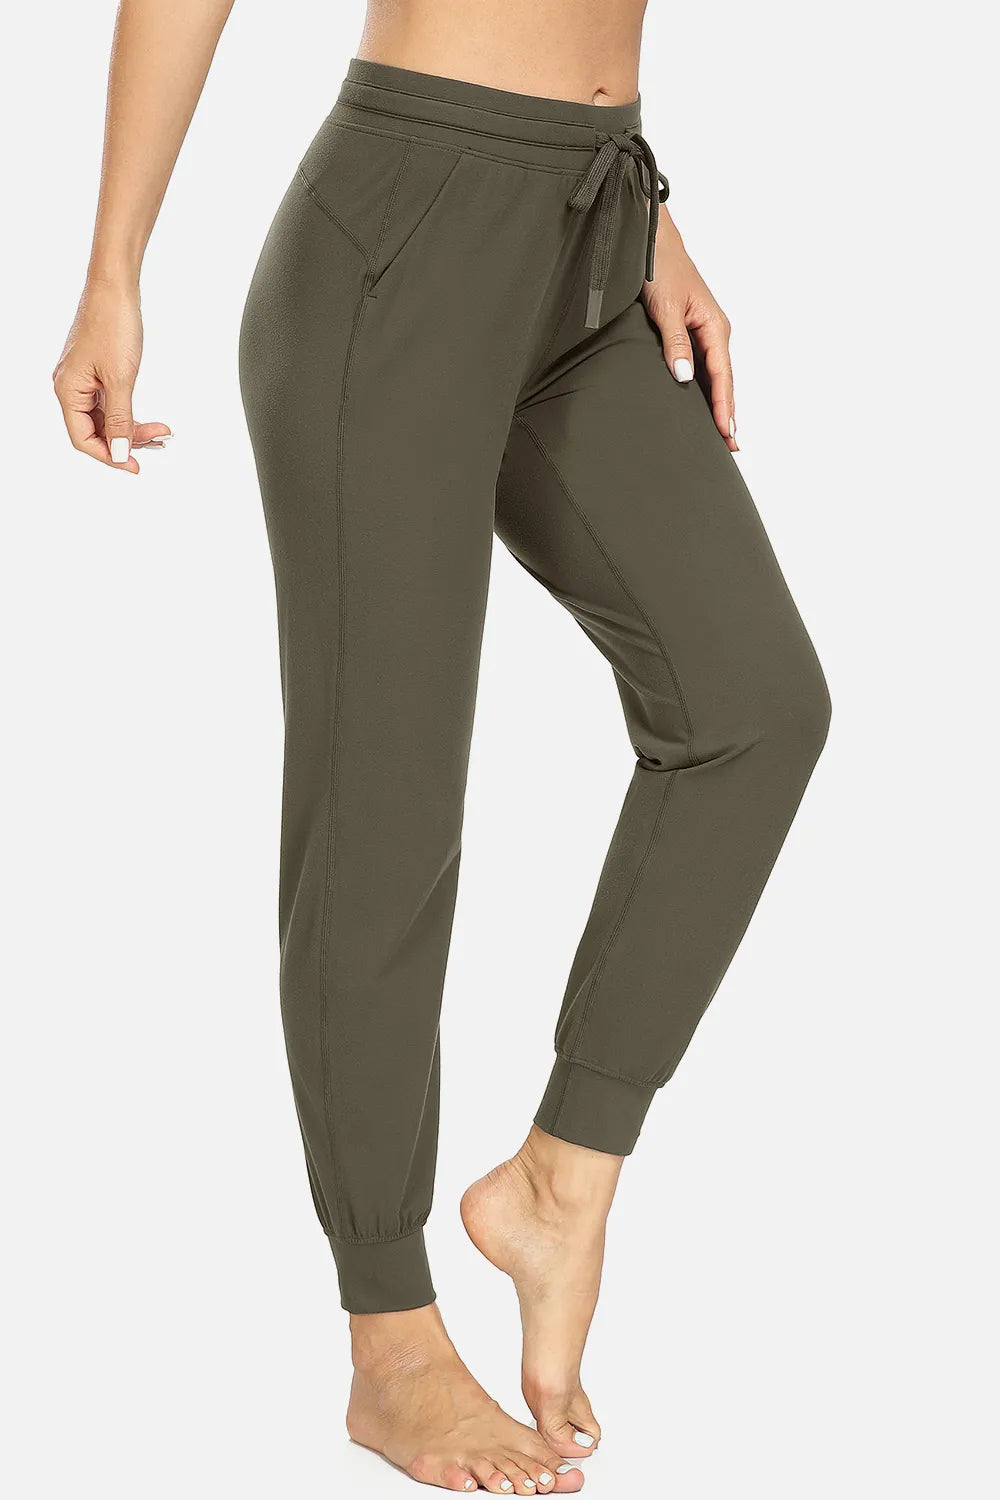 Dreamlux Flared Leggings with Zippered Pockets 29.5 / 31.5